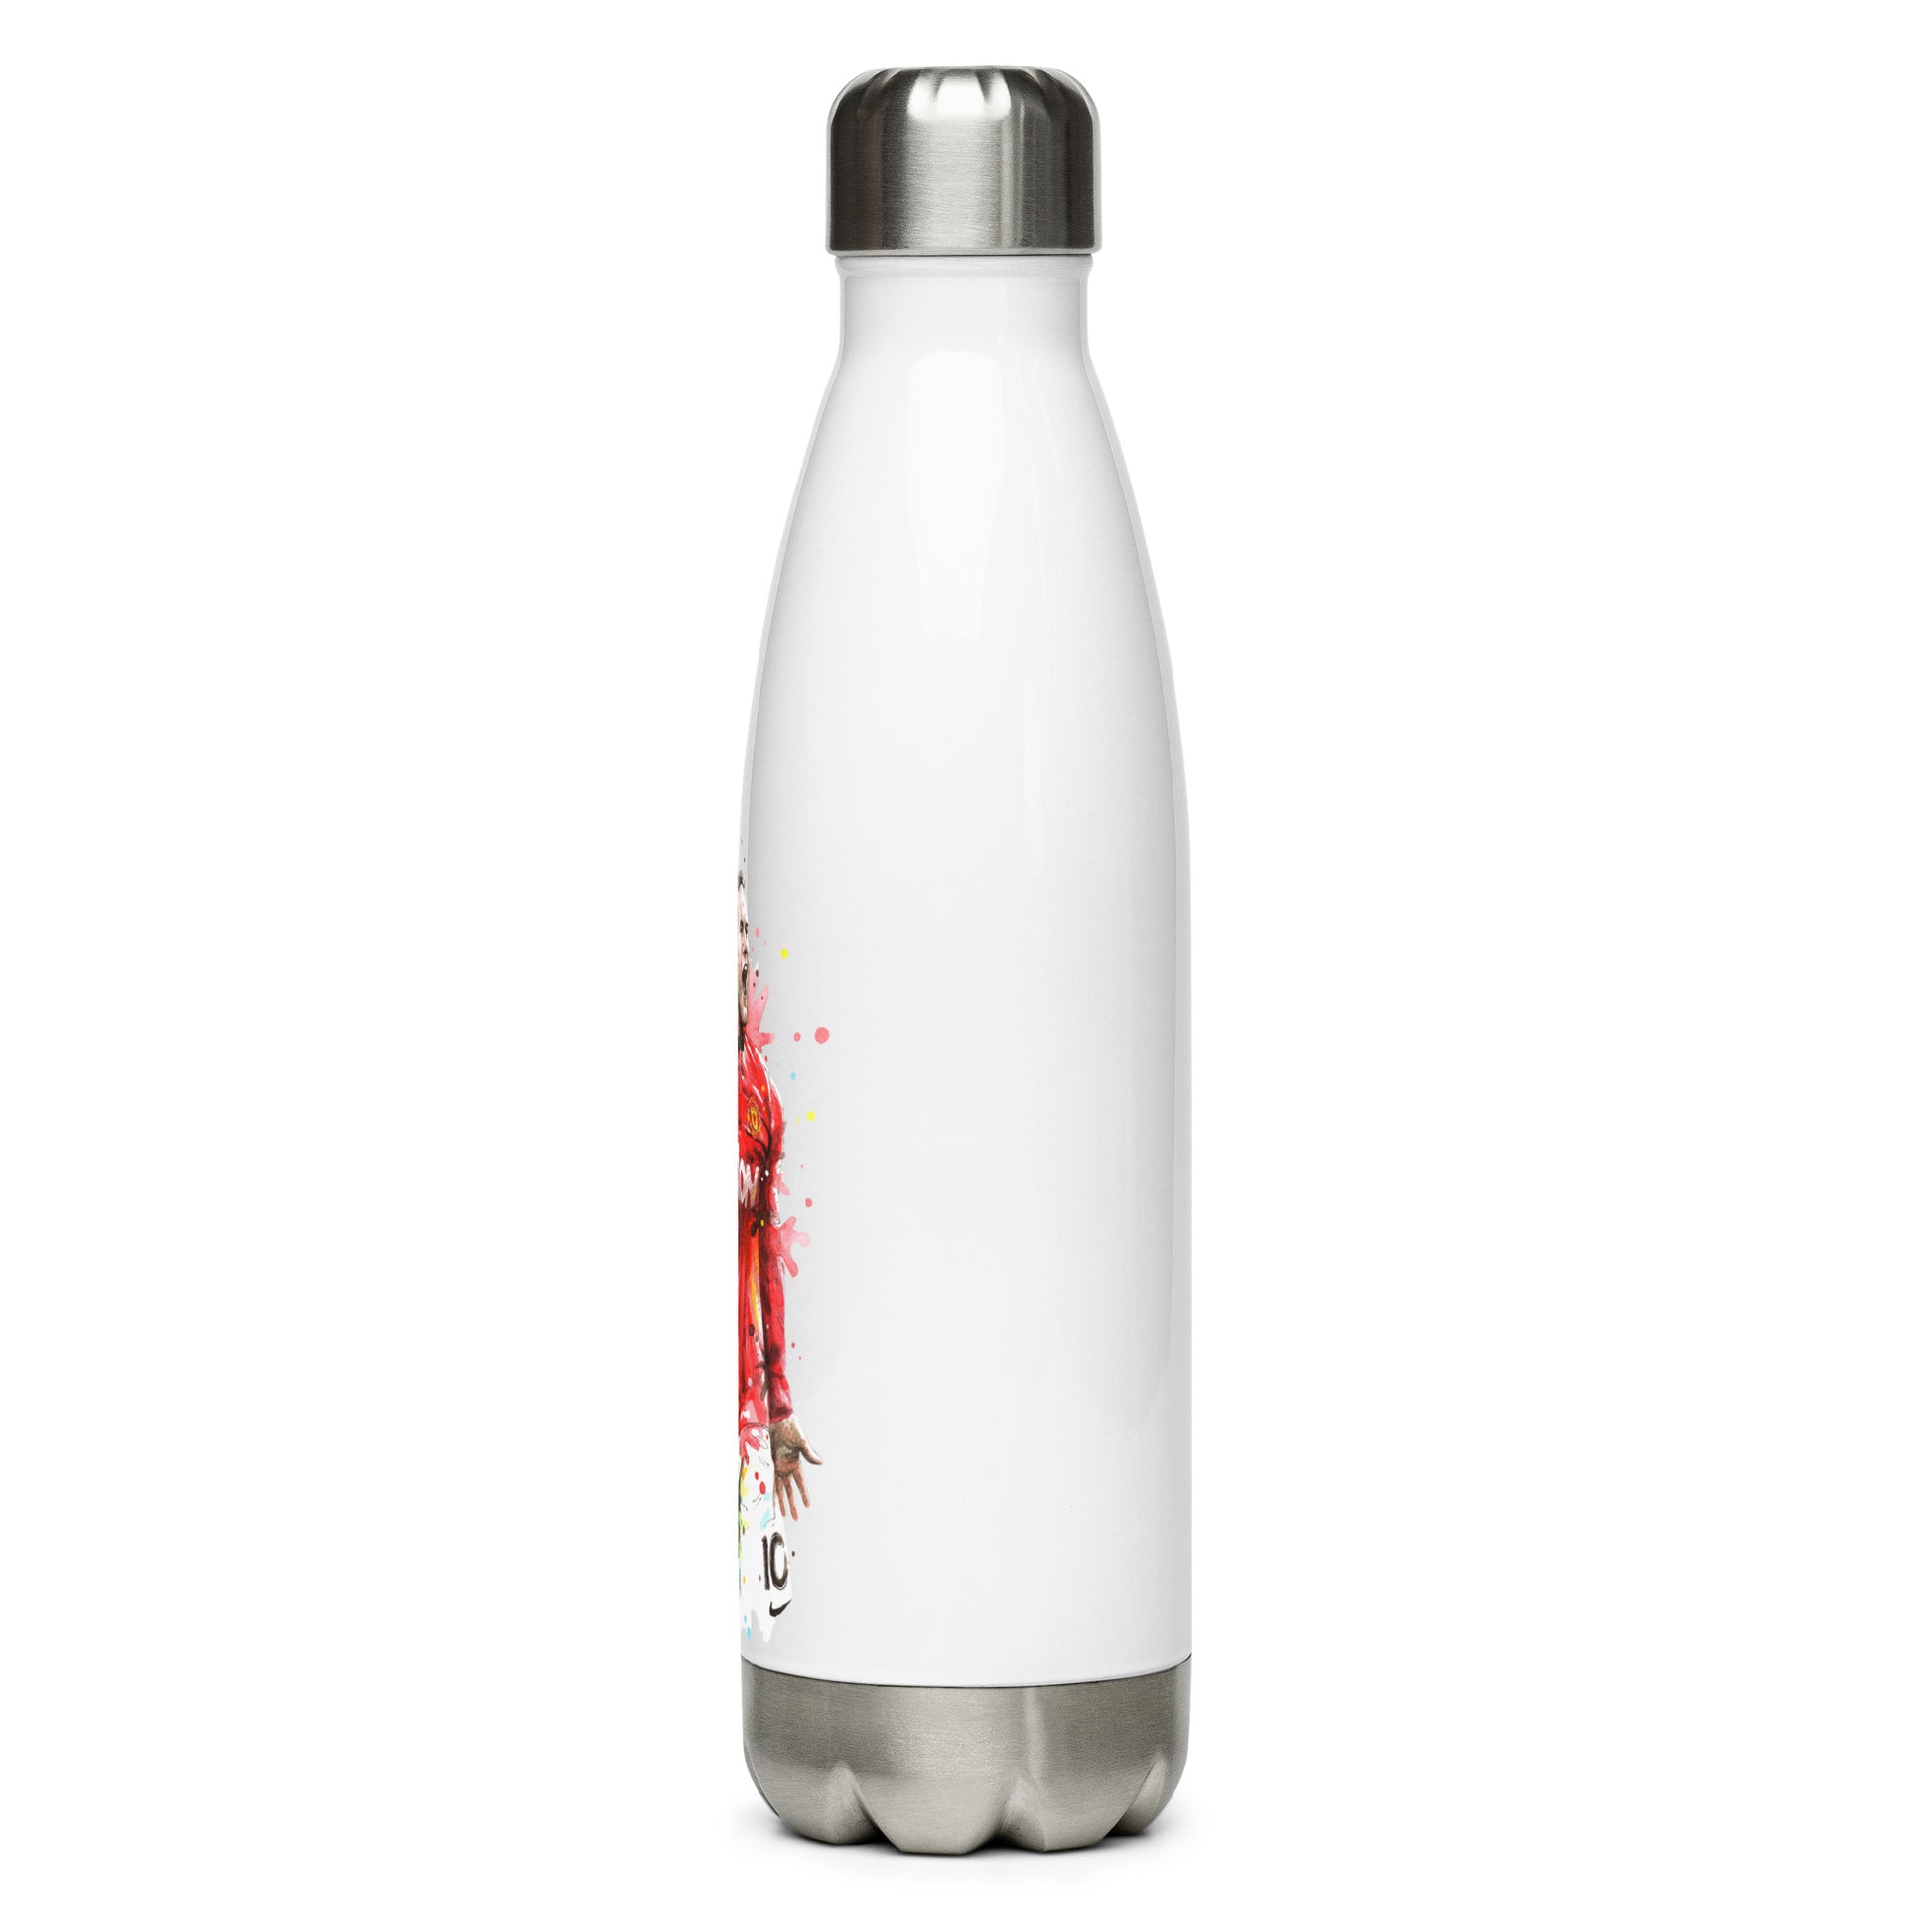 Manchester United Wayne Rooney Vintage Stainless steel water bottle - The 90+ Minute